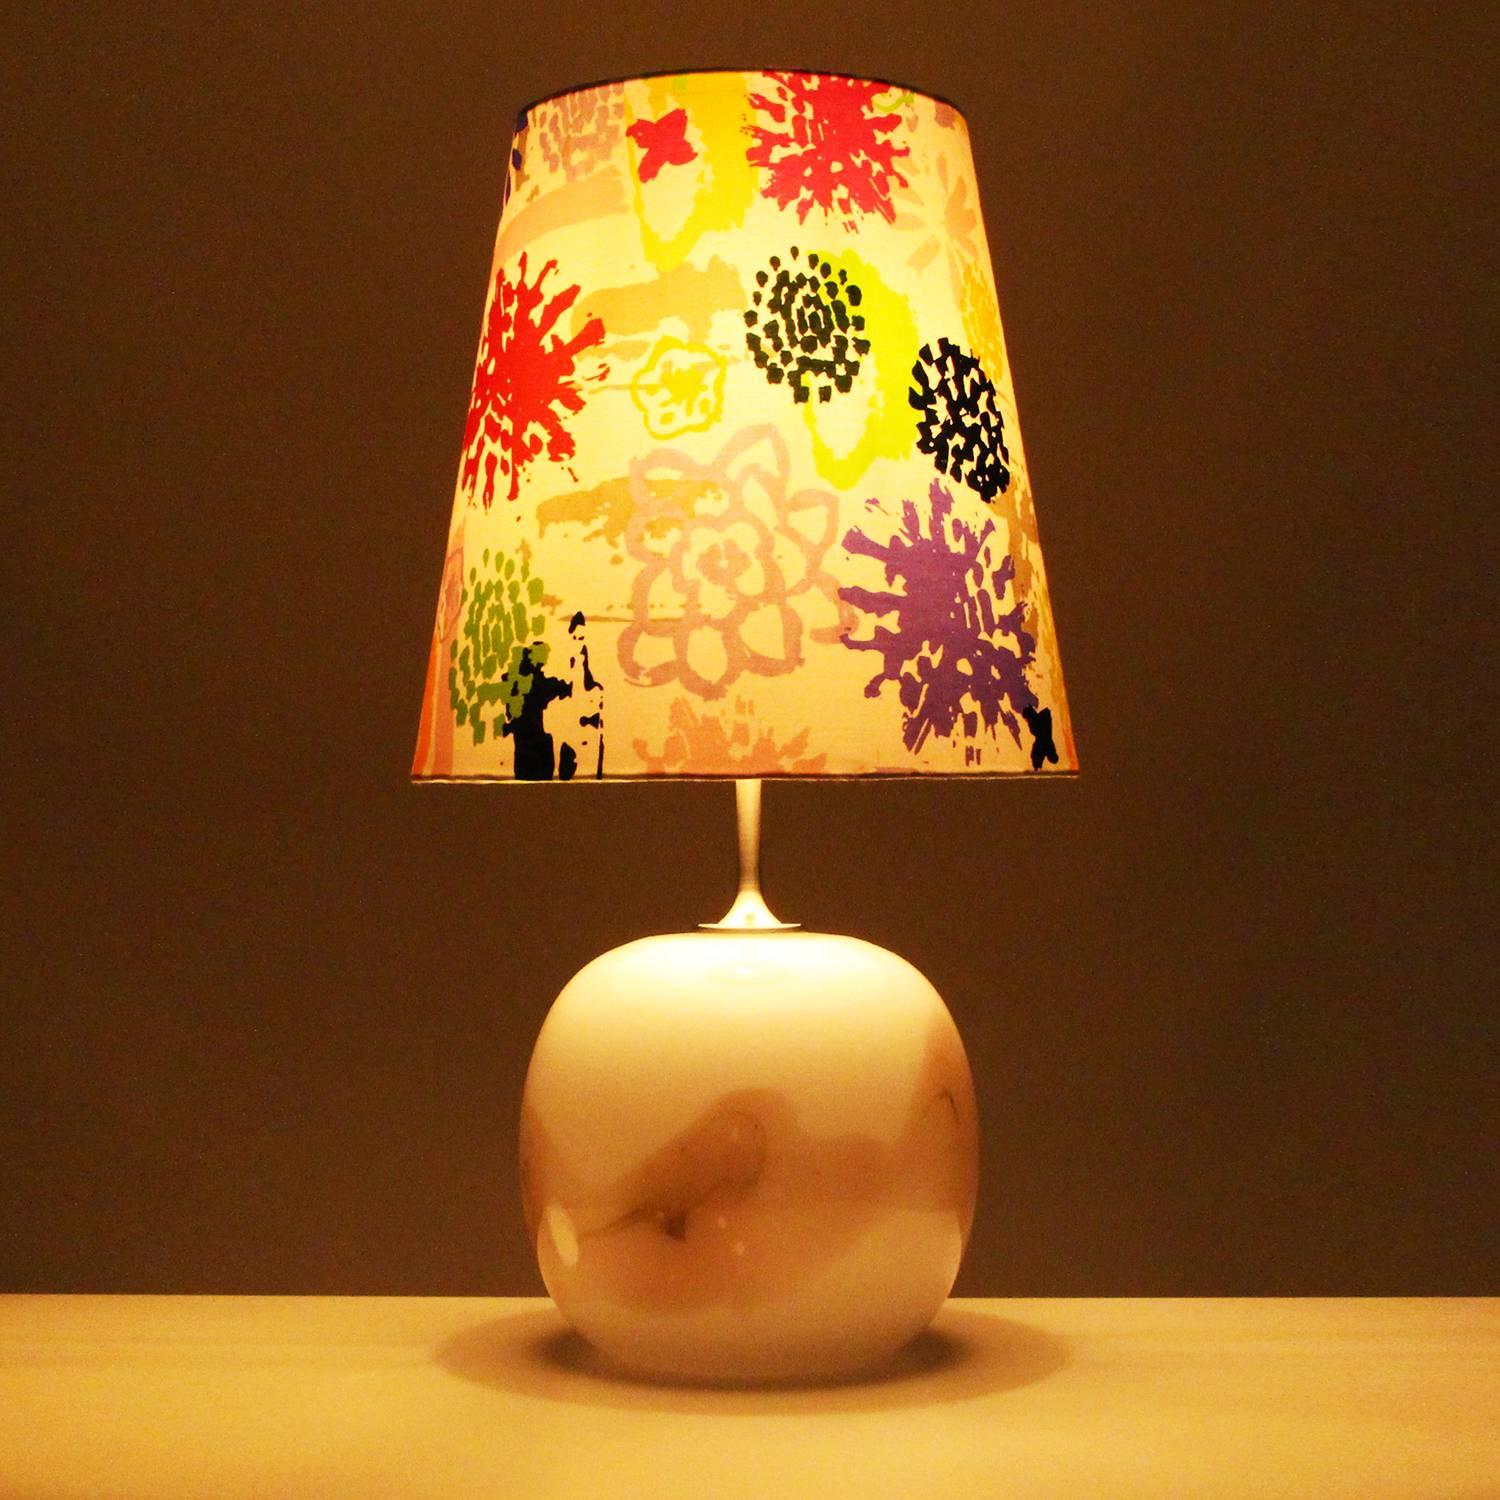 Sakura, large blown glass table lamp by Michael Bang in 1980 for Holmegaard Glassworks, beautiful milky white and rose lamp stand with large colorful shade included, all in very good vintage condition.

This large round lamp stand is made up of